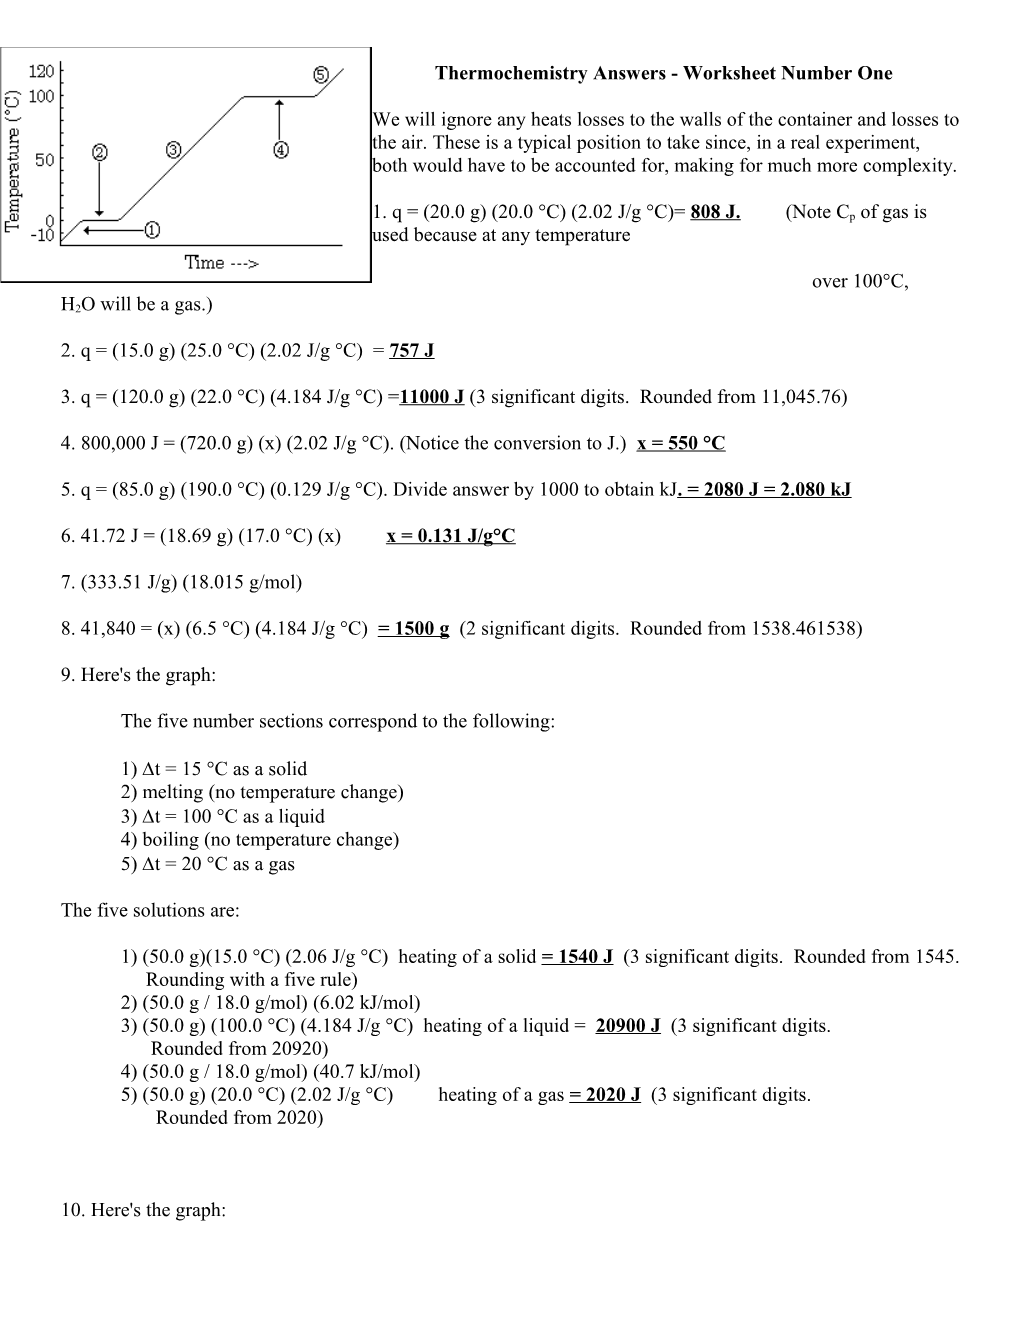 Thermochemistry Answers - Worksheet Number One